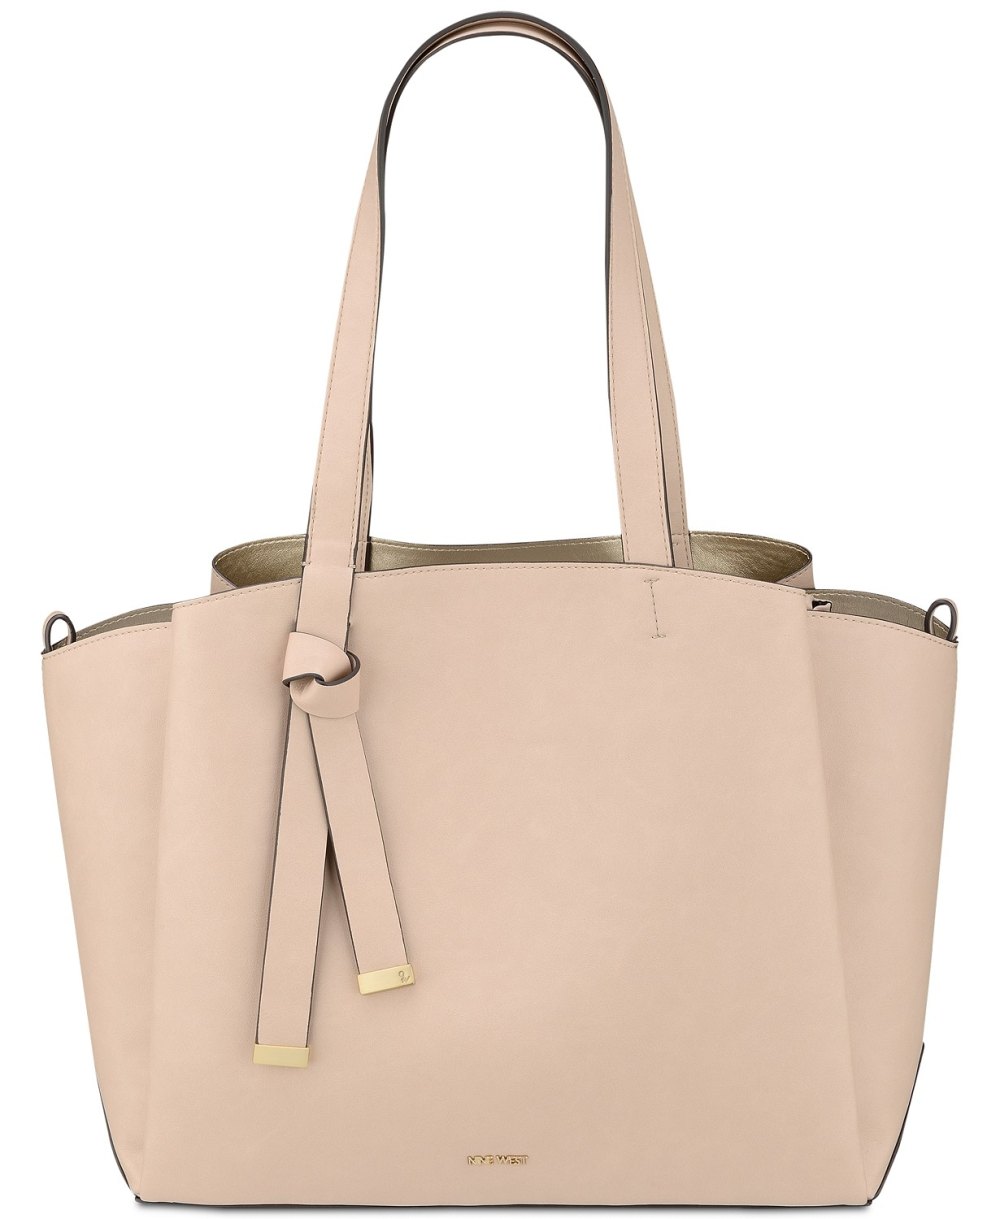 Nince West tote